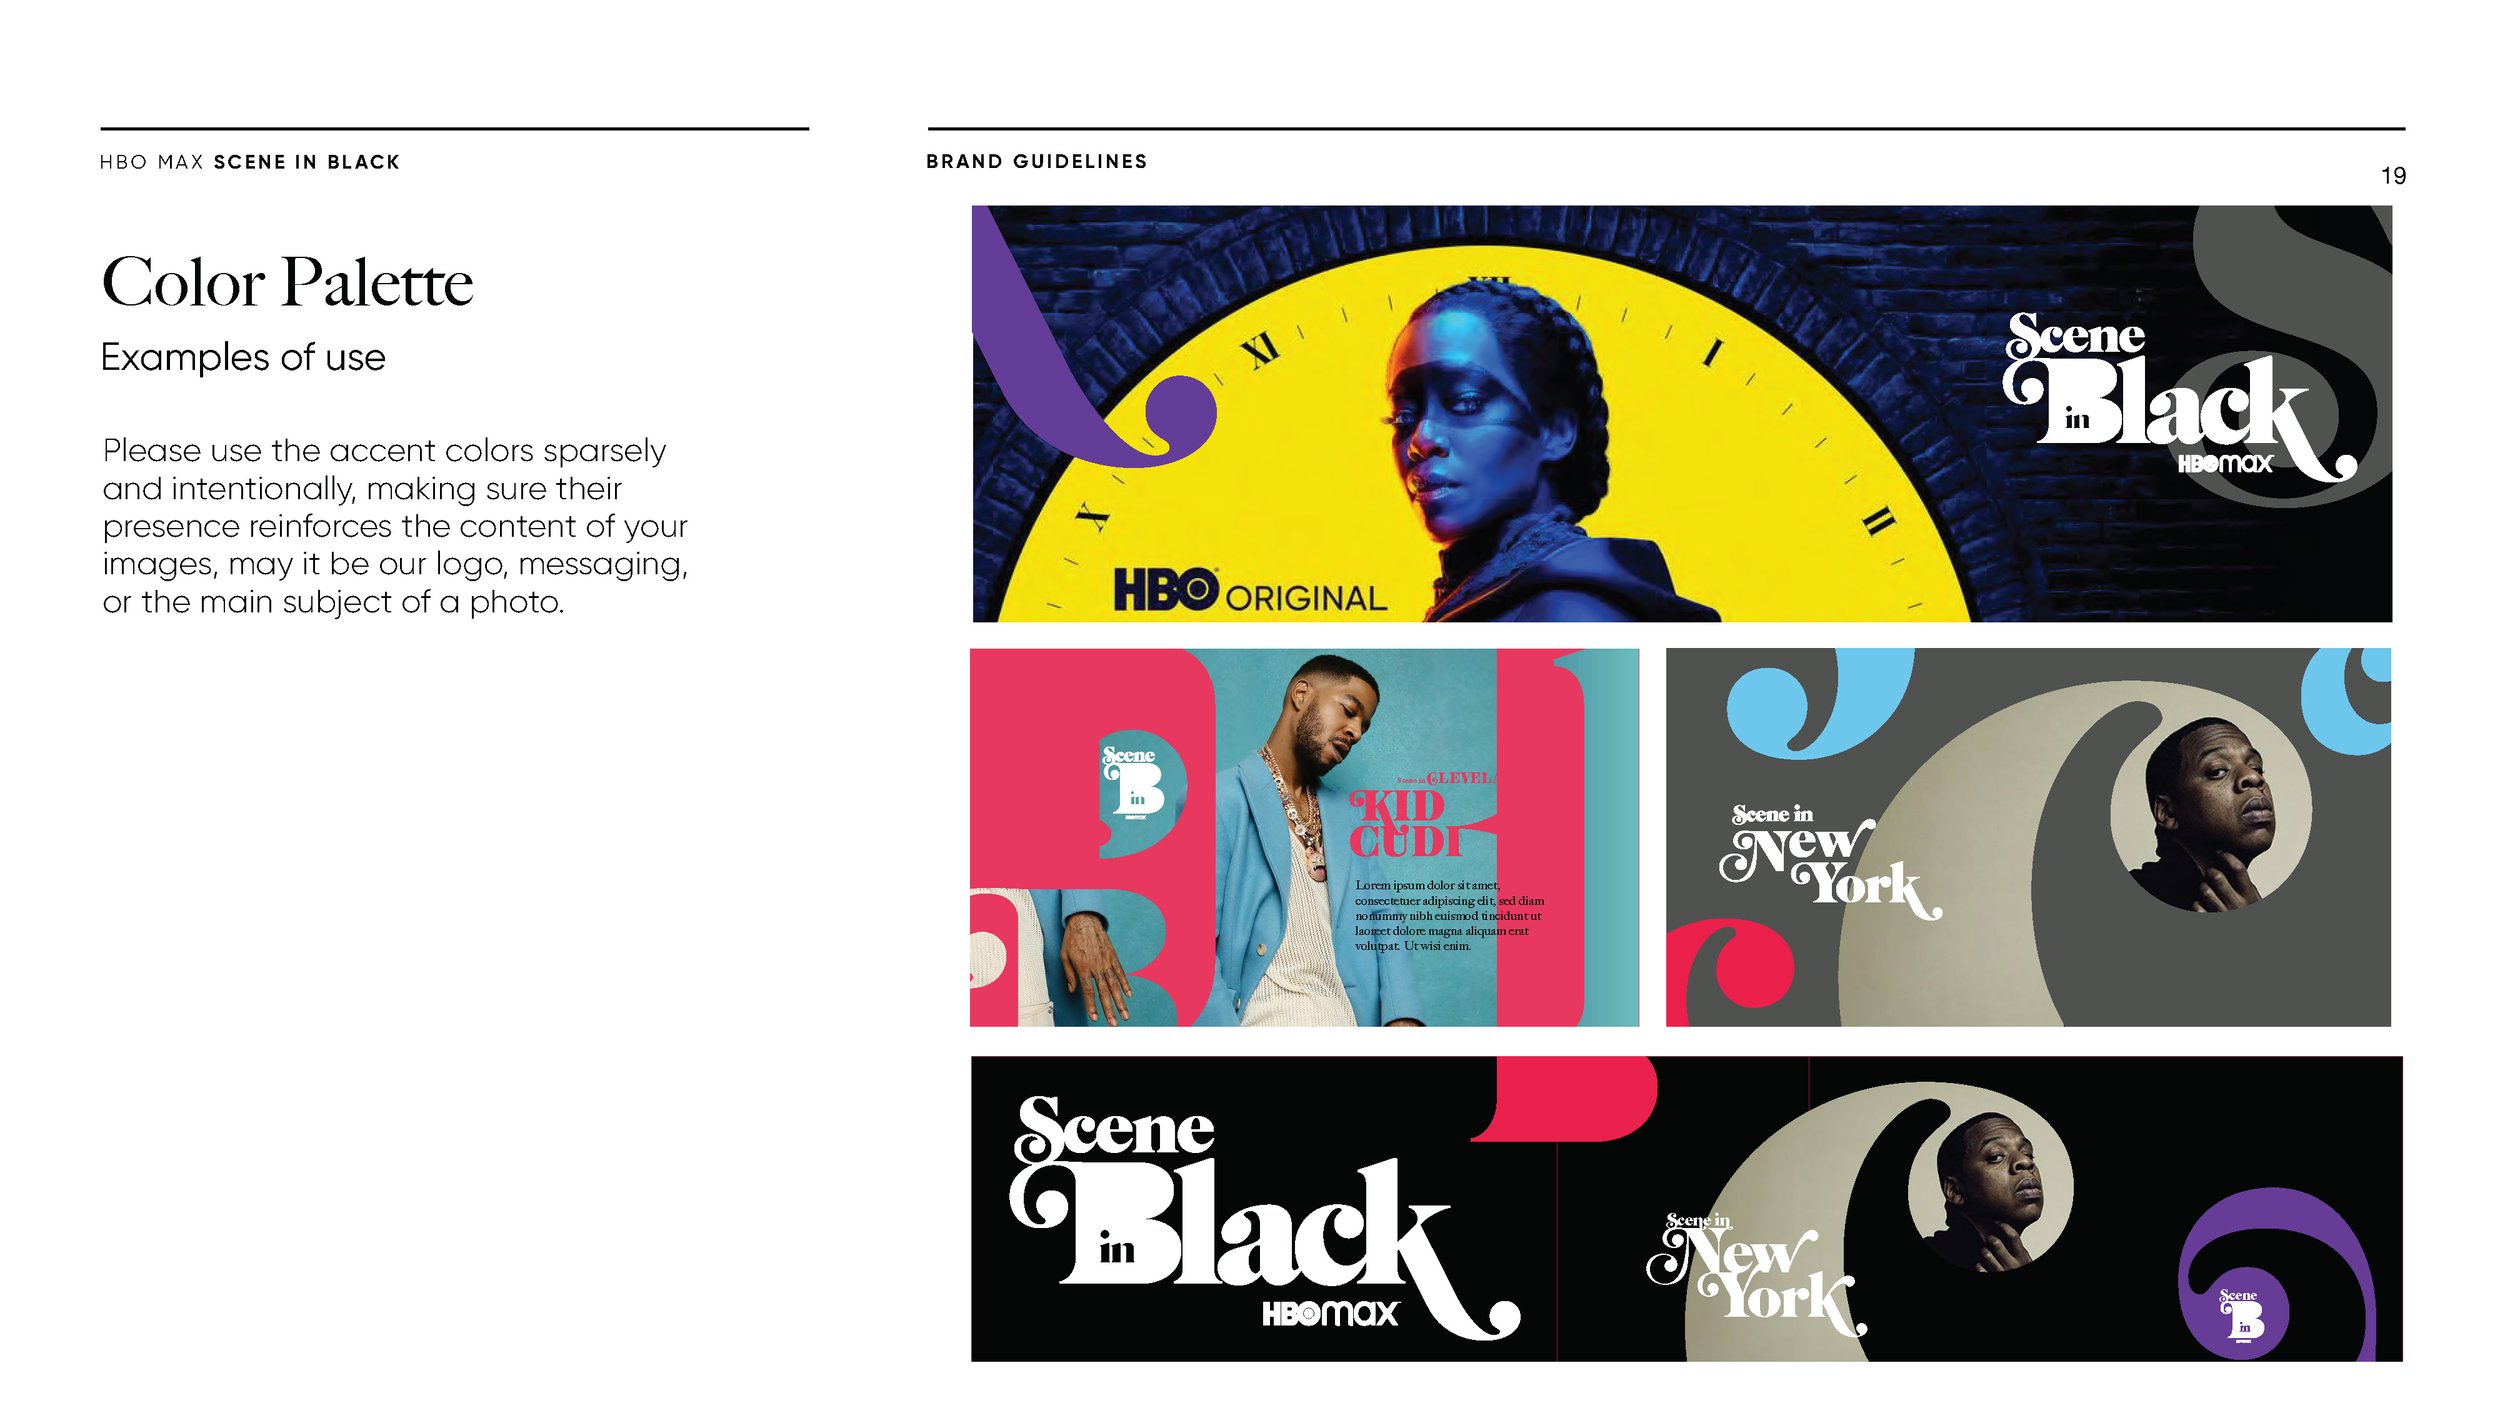 HBOMax_SceneinBlack | Brand Guidelines | Final Oct21_Page_19.jpg